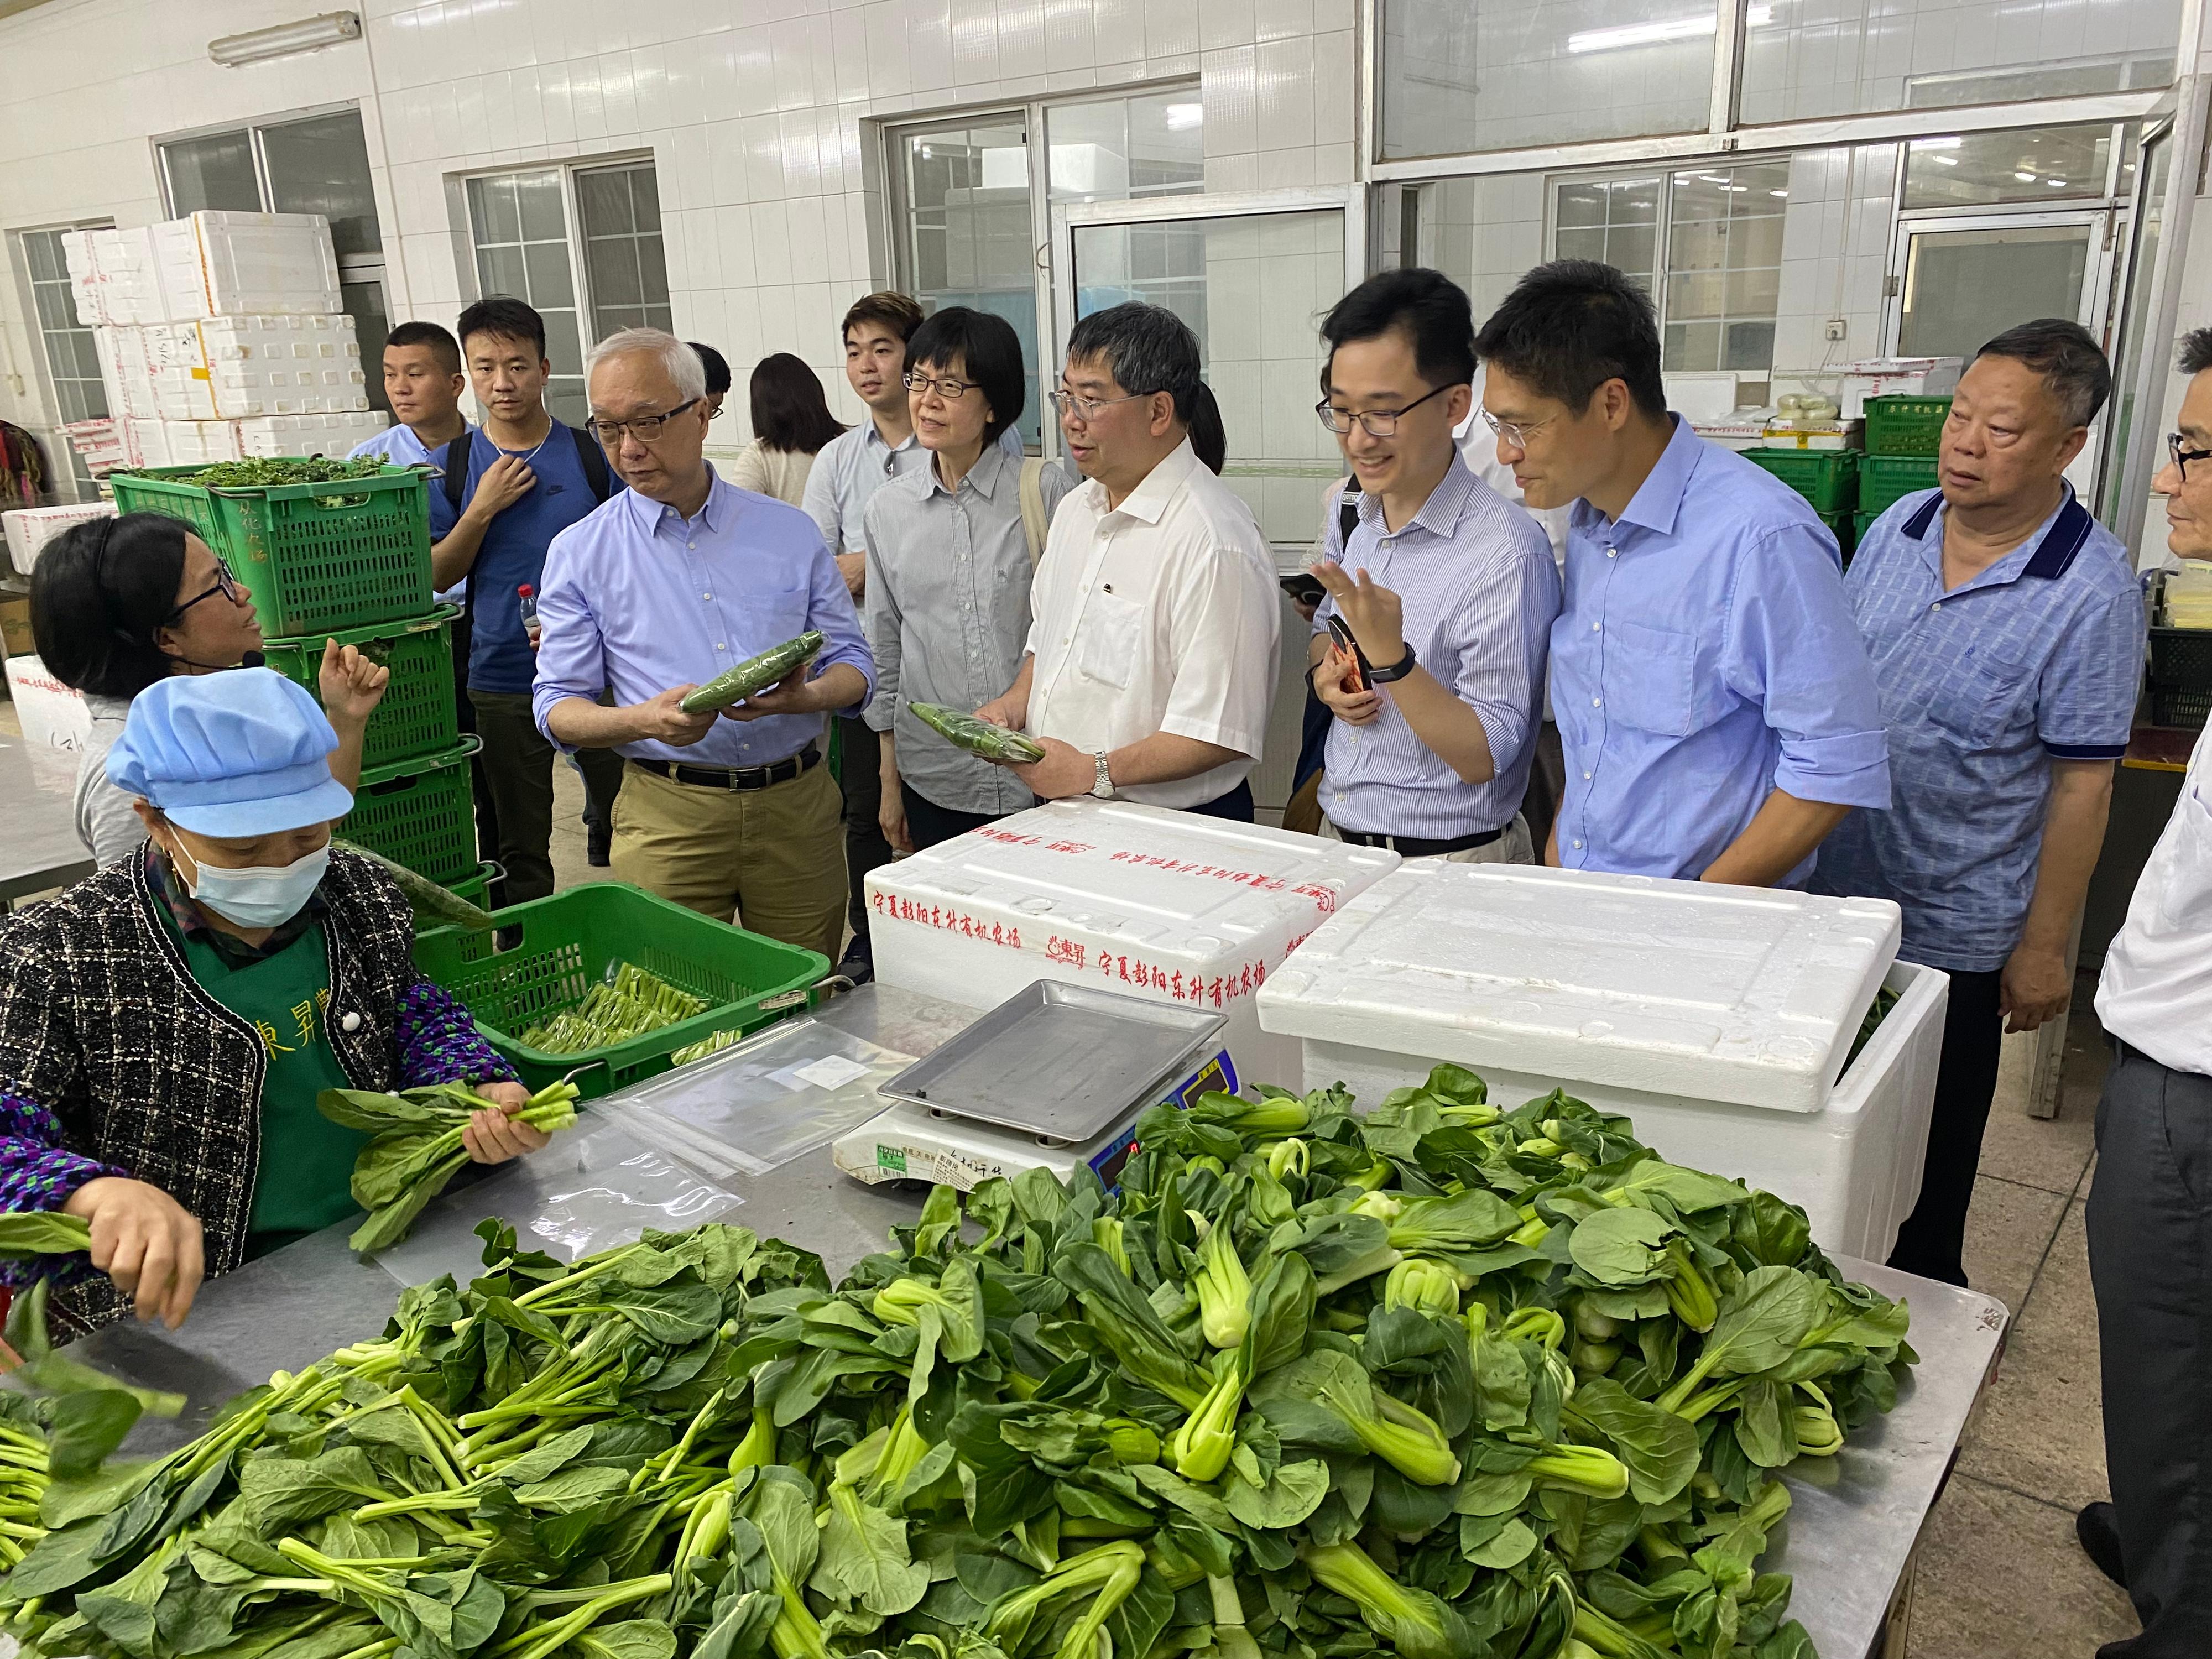 The Secretary for Environment and Ecology, Mr Tse Chin-wan, visited a vegetable farm in Nansha District of Guangzhou yesterday morning (July 19). Photo shows Mr Tse (third left); the Permanent Secretary for Environment and Ecology (Food), Miss Vivian Lau (fourth left); and the Director of Agriculture, Fisheries and Conservation, Dr Leung Siu-fai (fifth left), receiving a briefing from a representative on their advanced facilities and agricultural product safety tracking system.